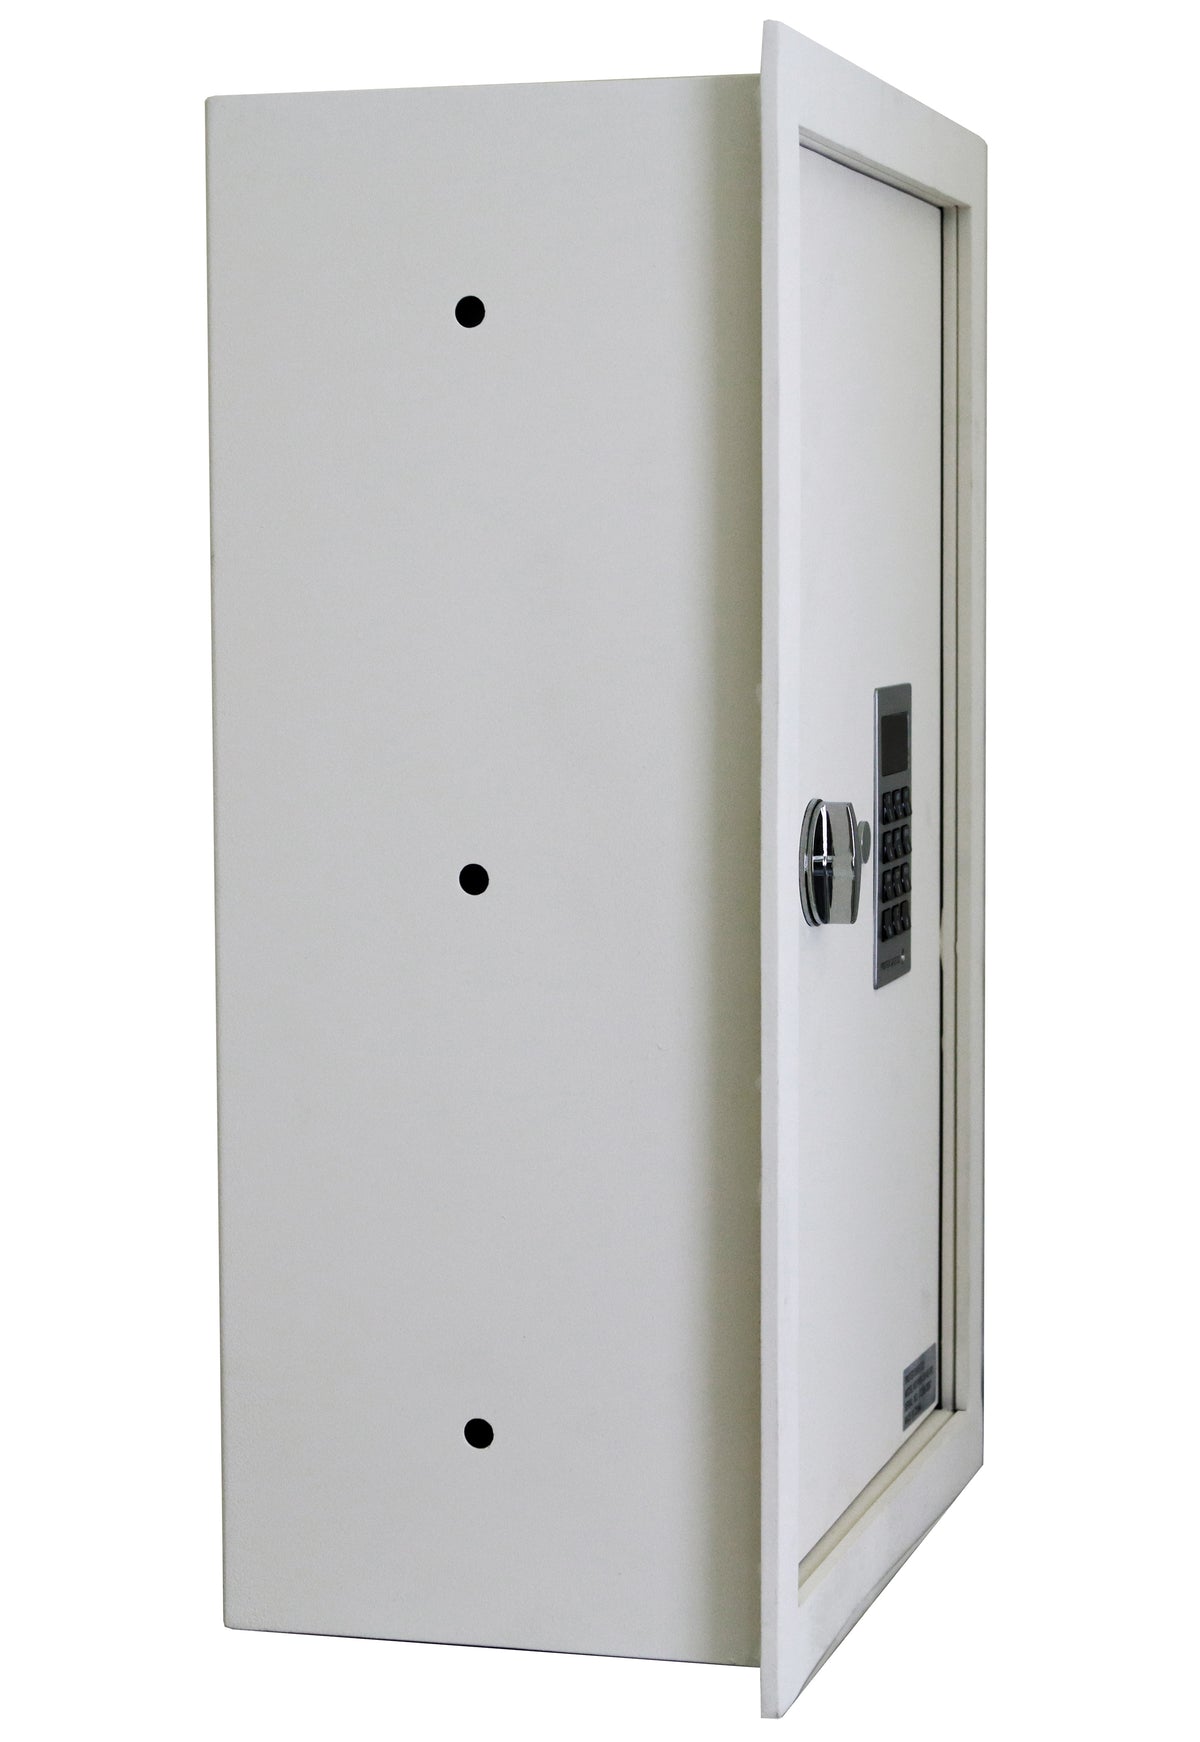 Protex PWS-1814E-FR 30 Minute Fire Rated Wall Safe Side View